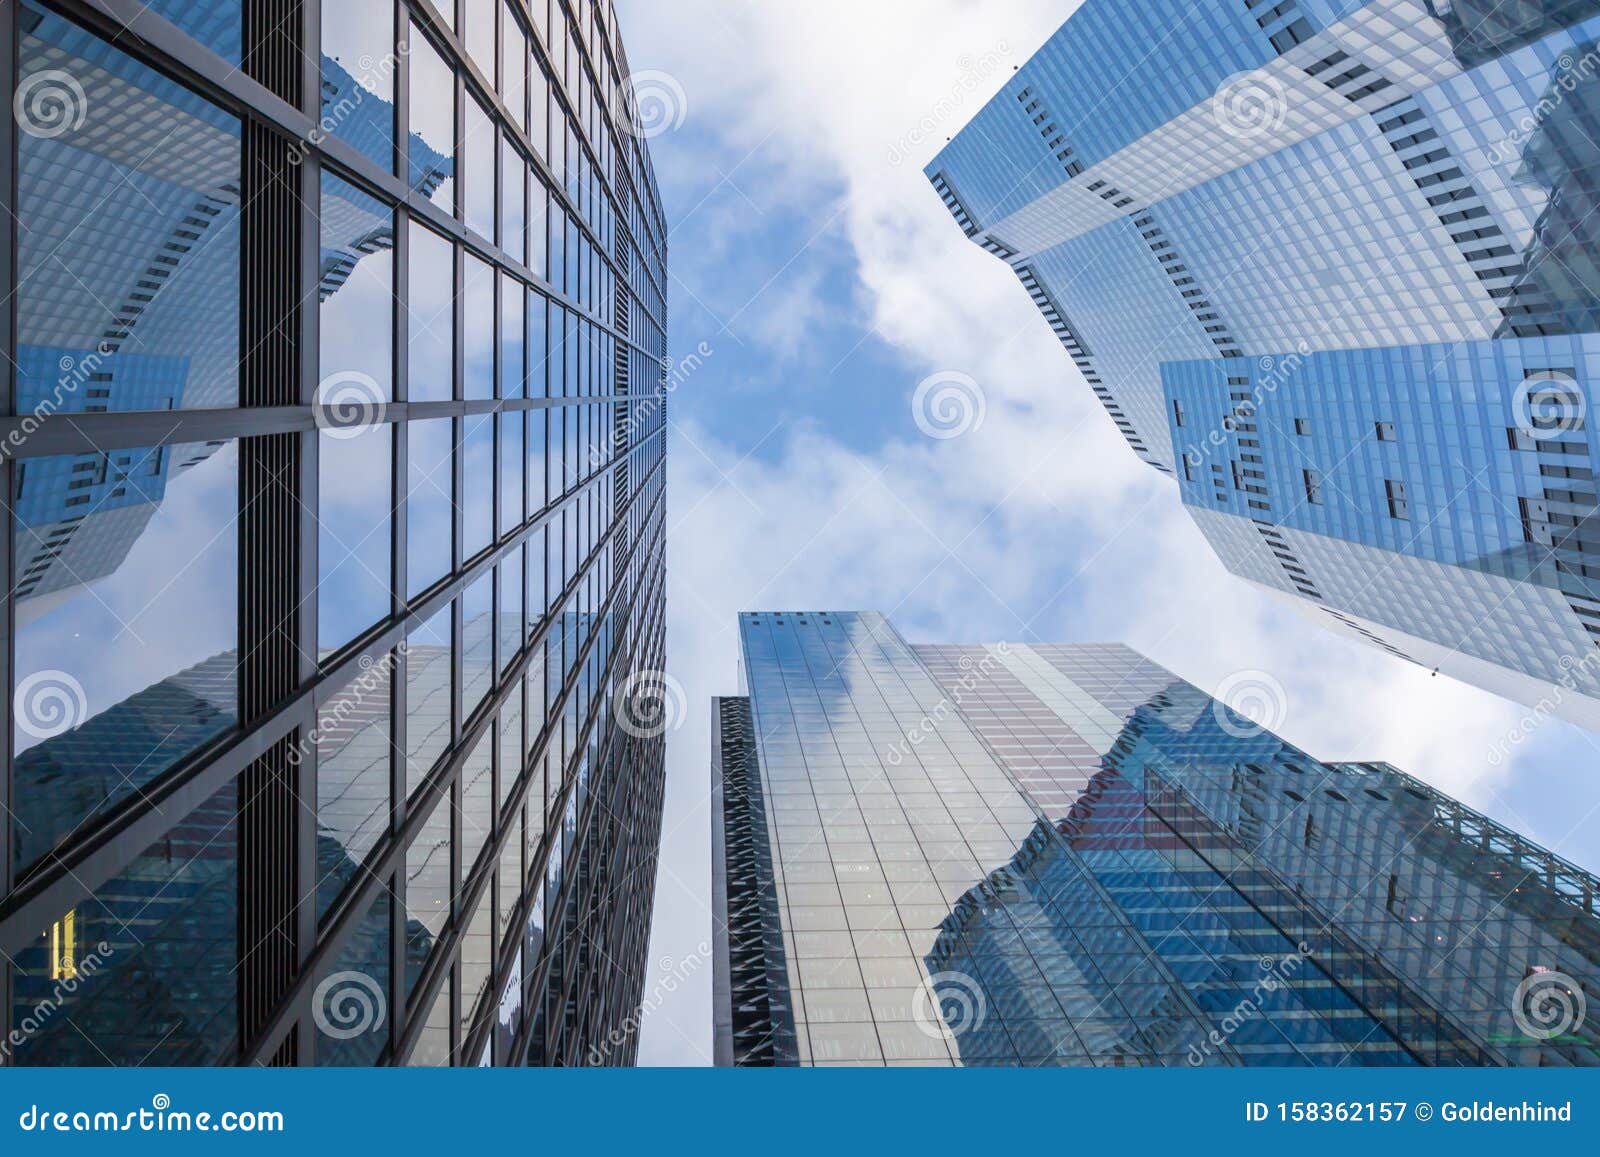 concept of financial economics future. business offices skyscrapers on blue sky background